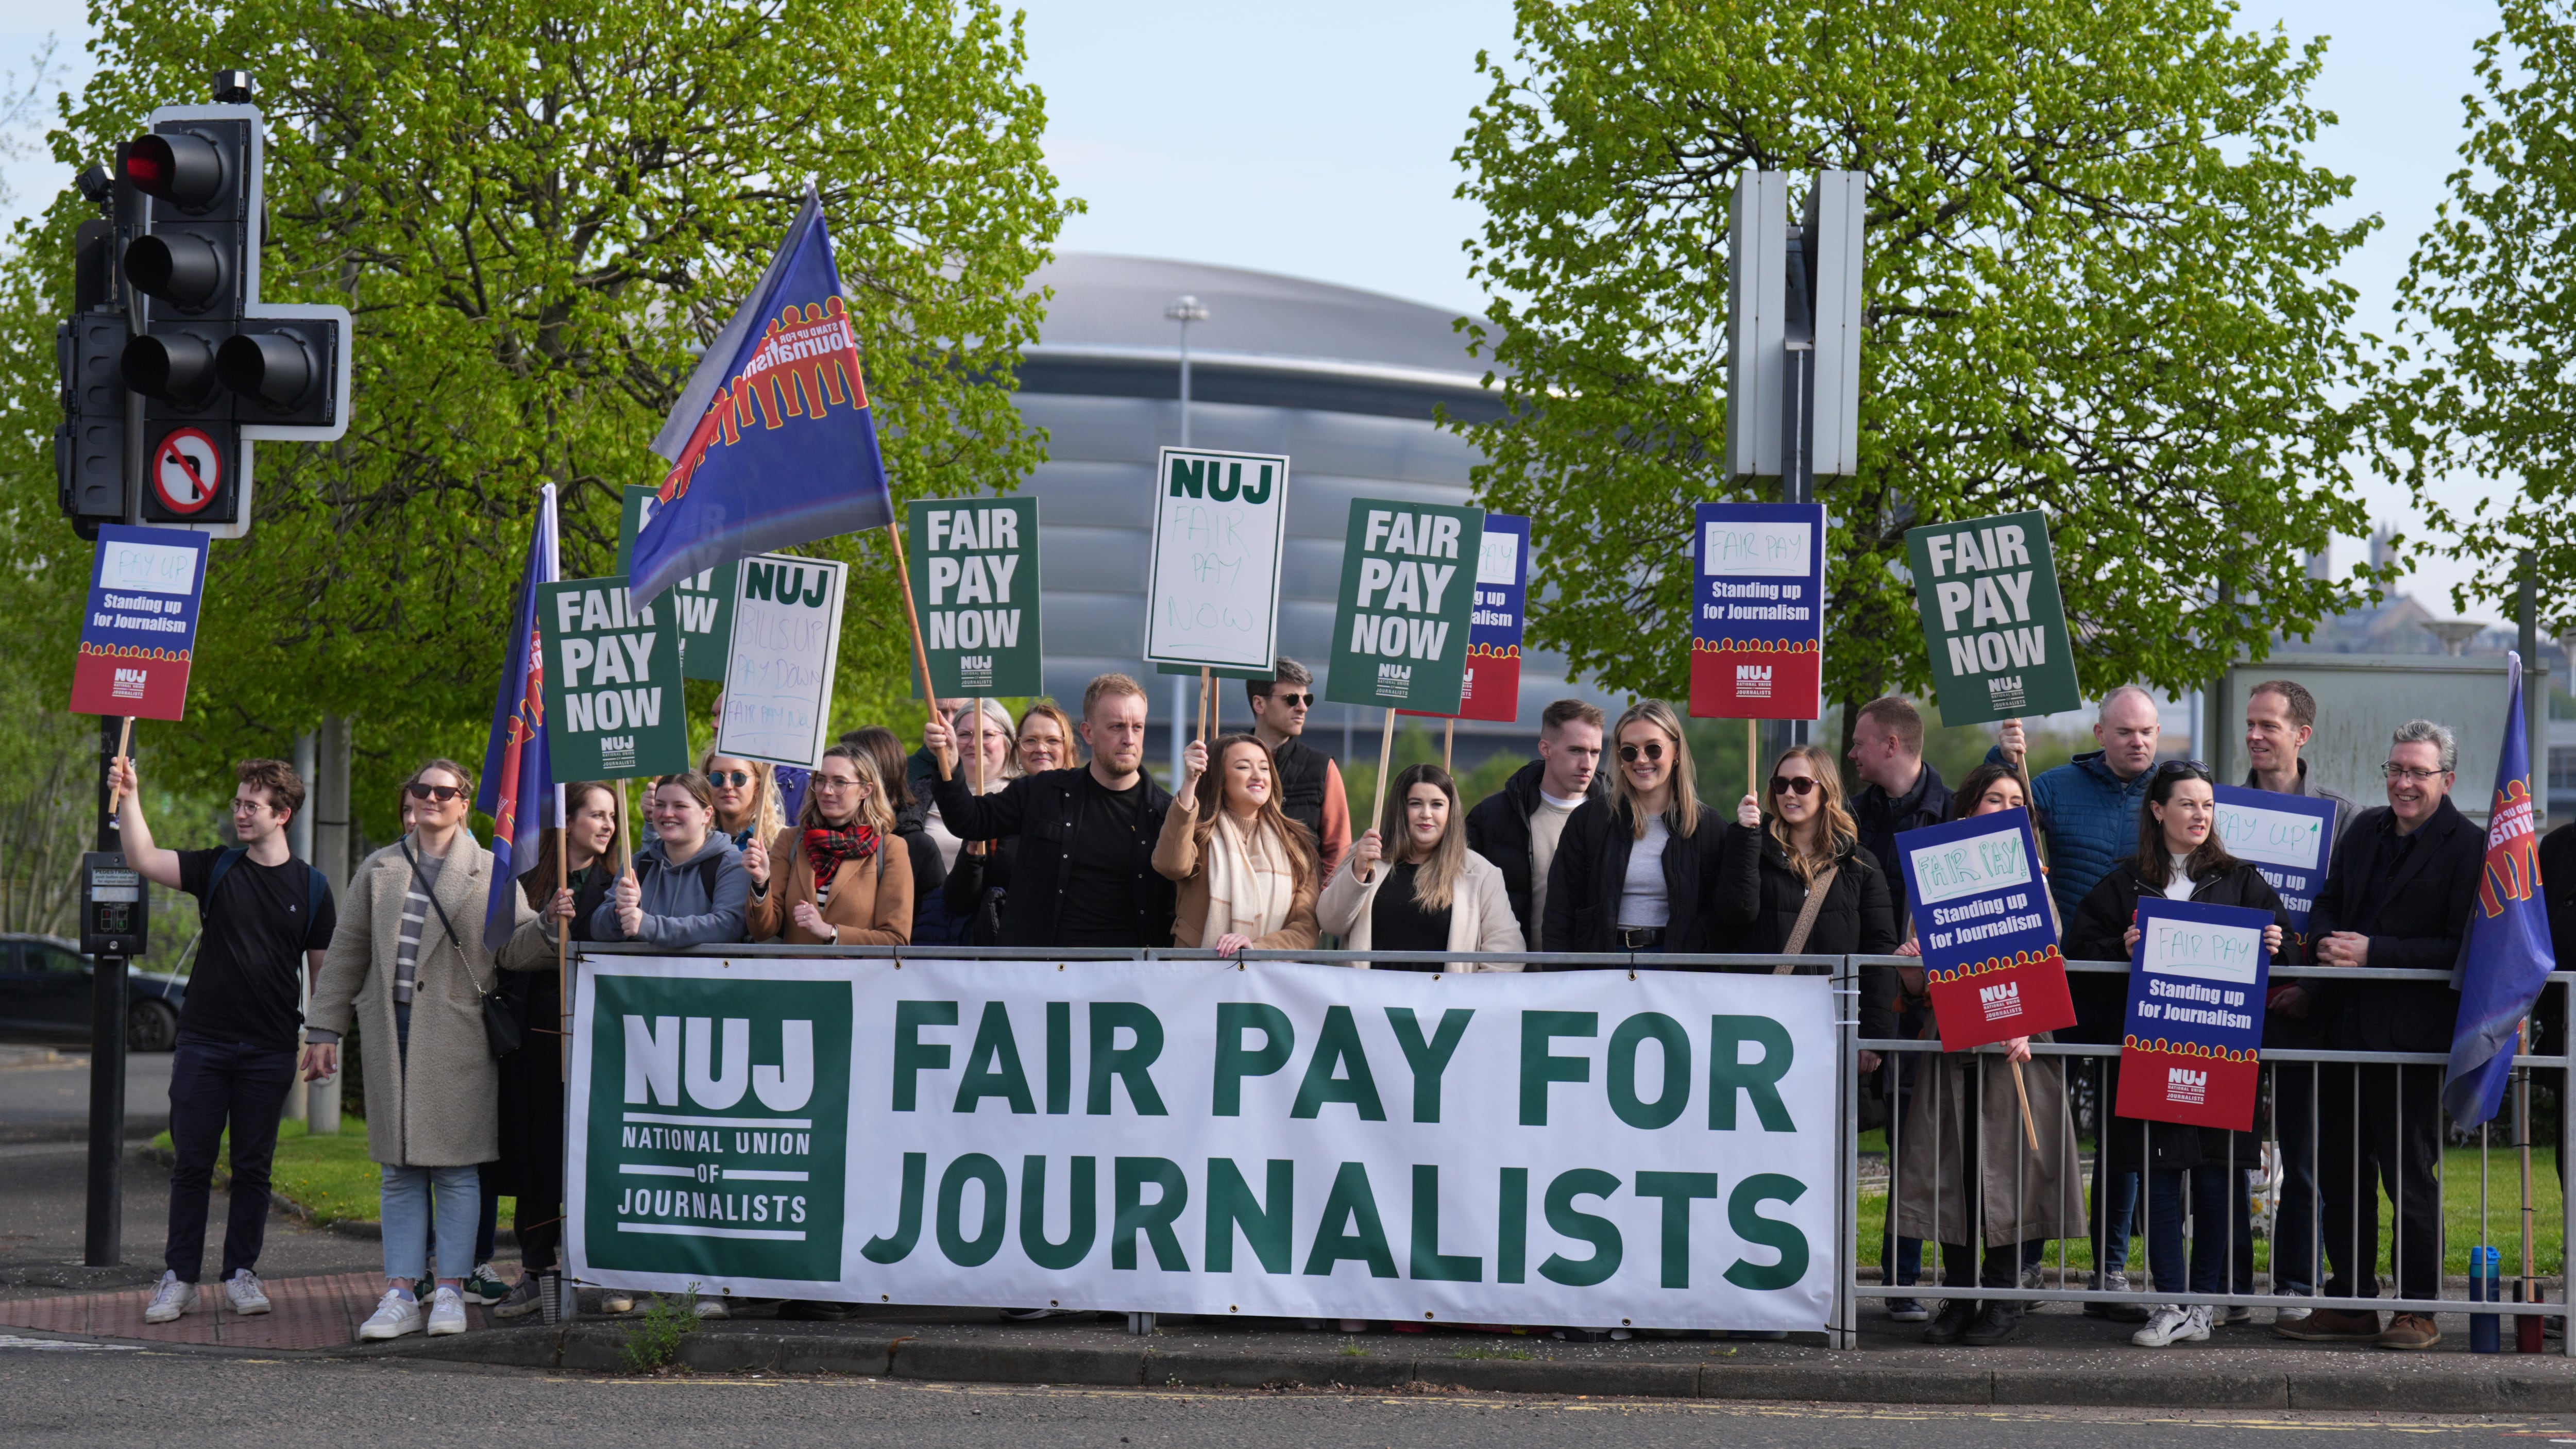 Journalists walked out on Wednesday